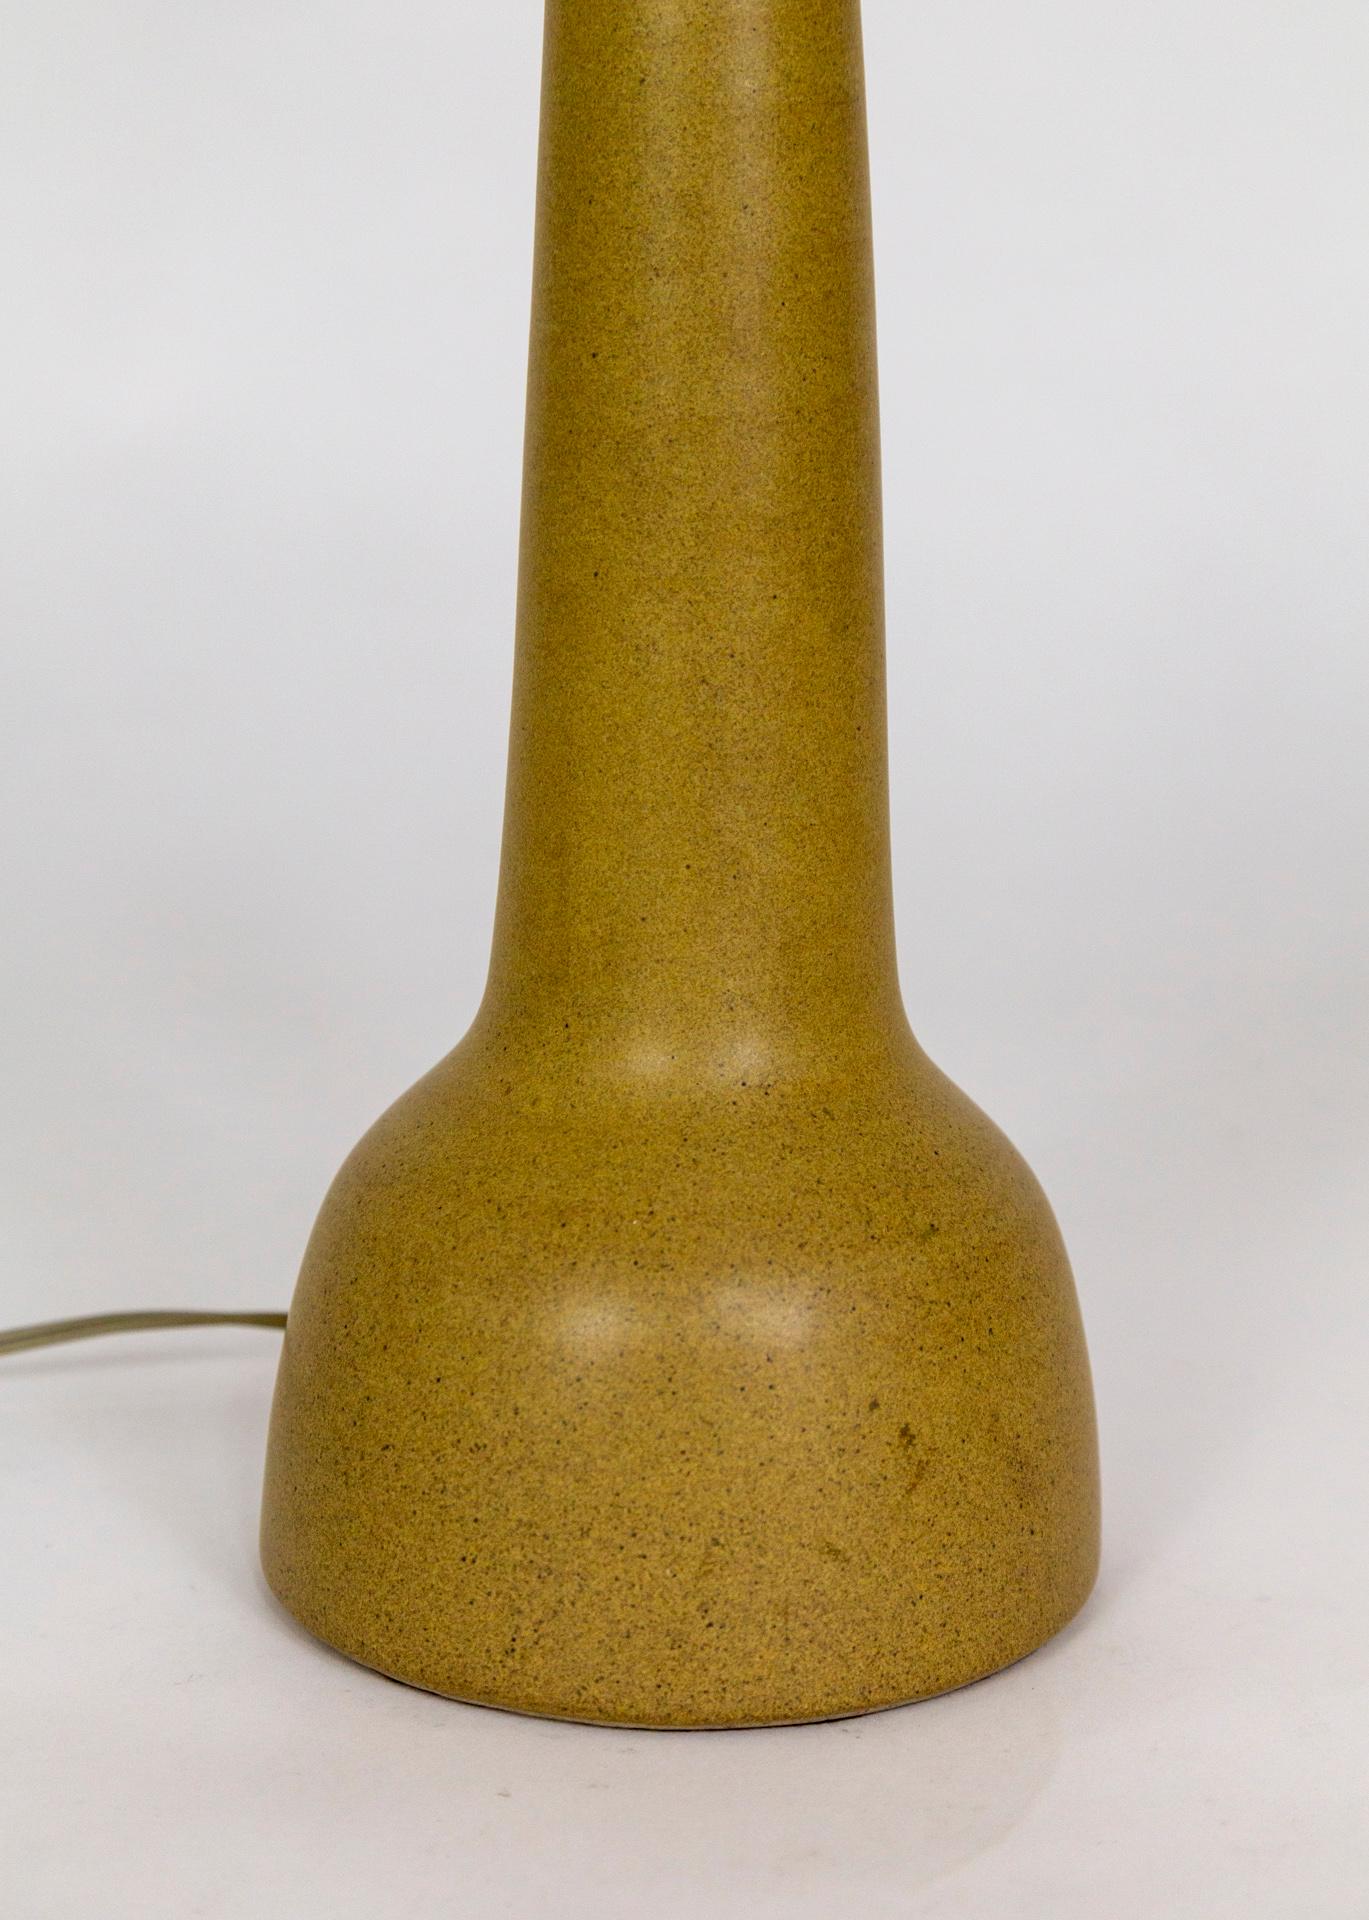 A streamlined, ceramic lamp, glazed in matte camel; made by Marshall Studios and designed by Jane and Gordon Martz, circa the 1960s. Signed on the back.  5.75